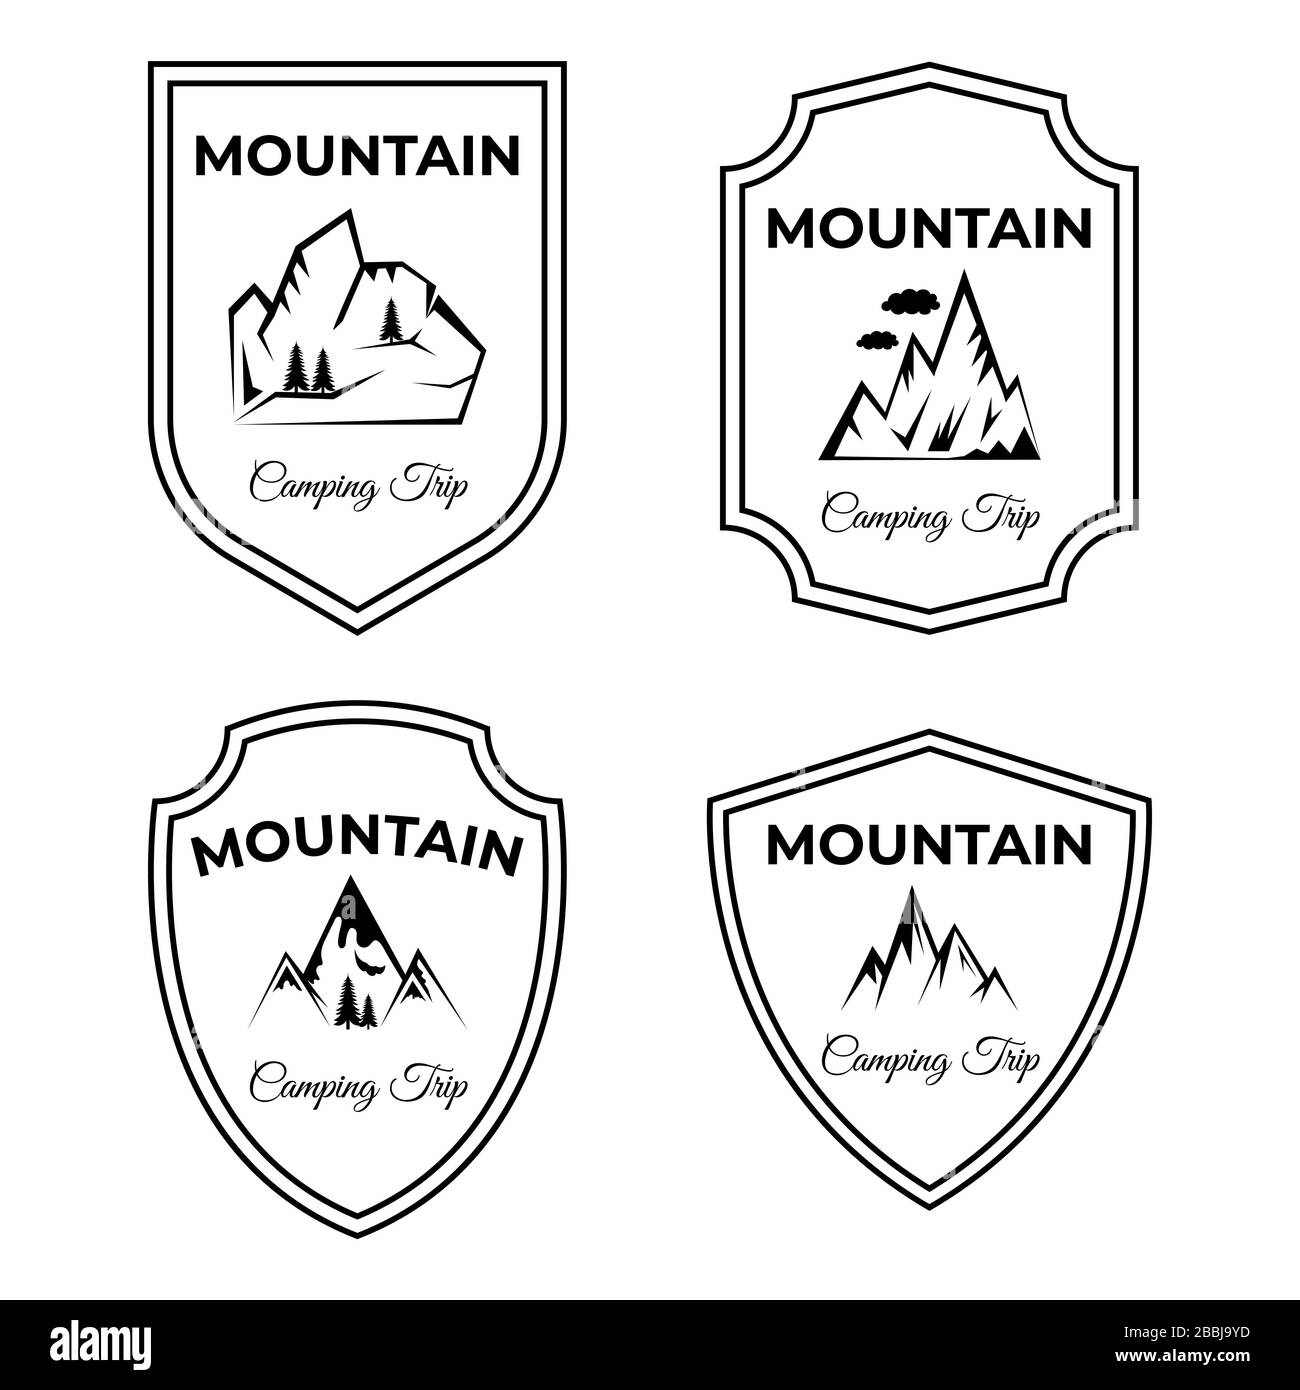 Set of mountain, camping trip vector logo designs. Peaks of mounts with text space. Active lifestyle, hiking, climbing, living on nature, traveling in alps icons isolated on white background. Stock Vector